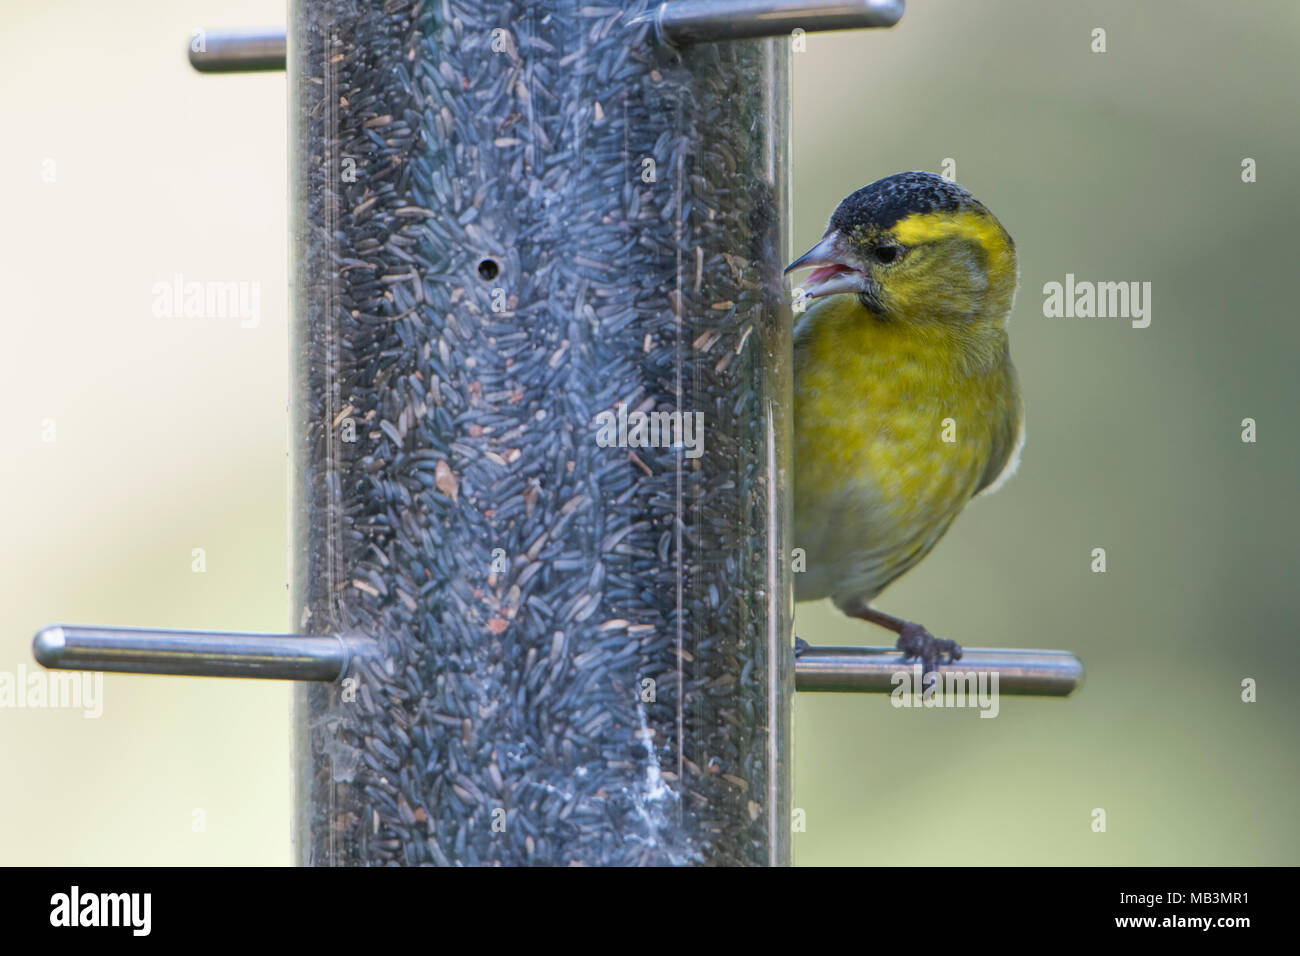 A male Siskin (Carduelis spinus) perched on a bird feeder eating niger seed. Garden, Kildary, Scotland, UK Stock Photo